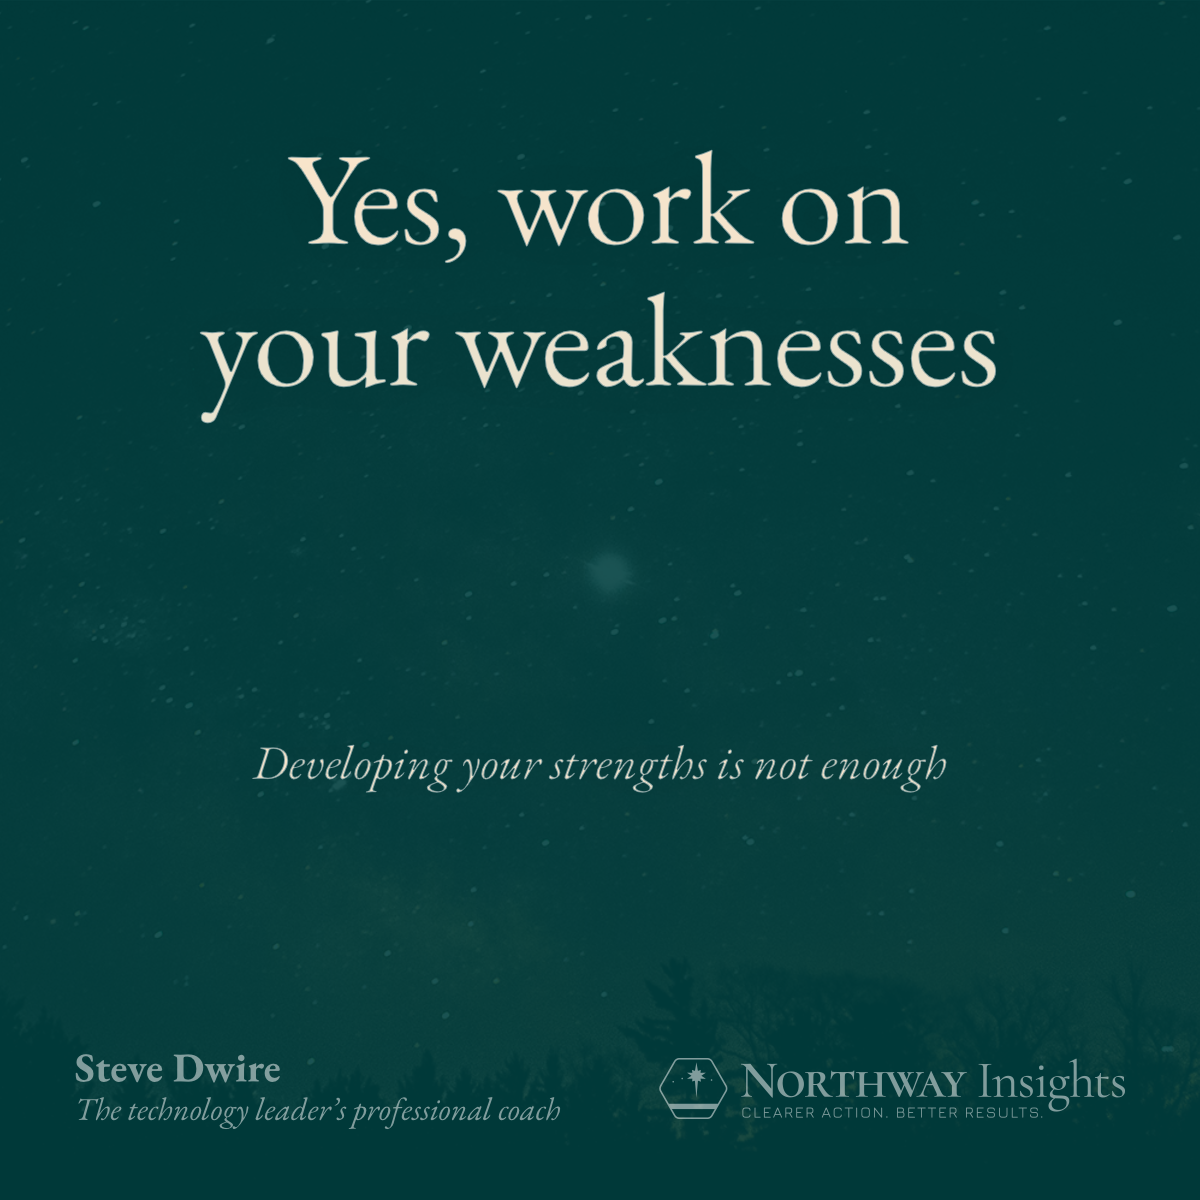 Yes, work on your weaknesses